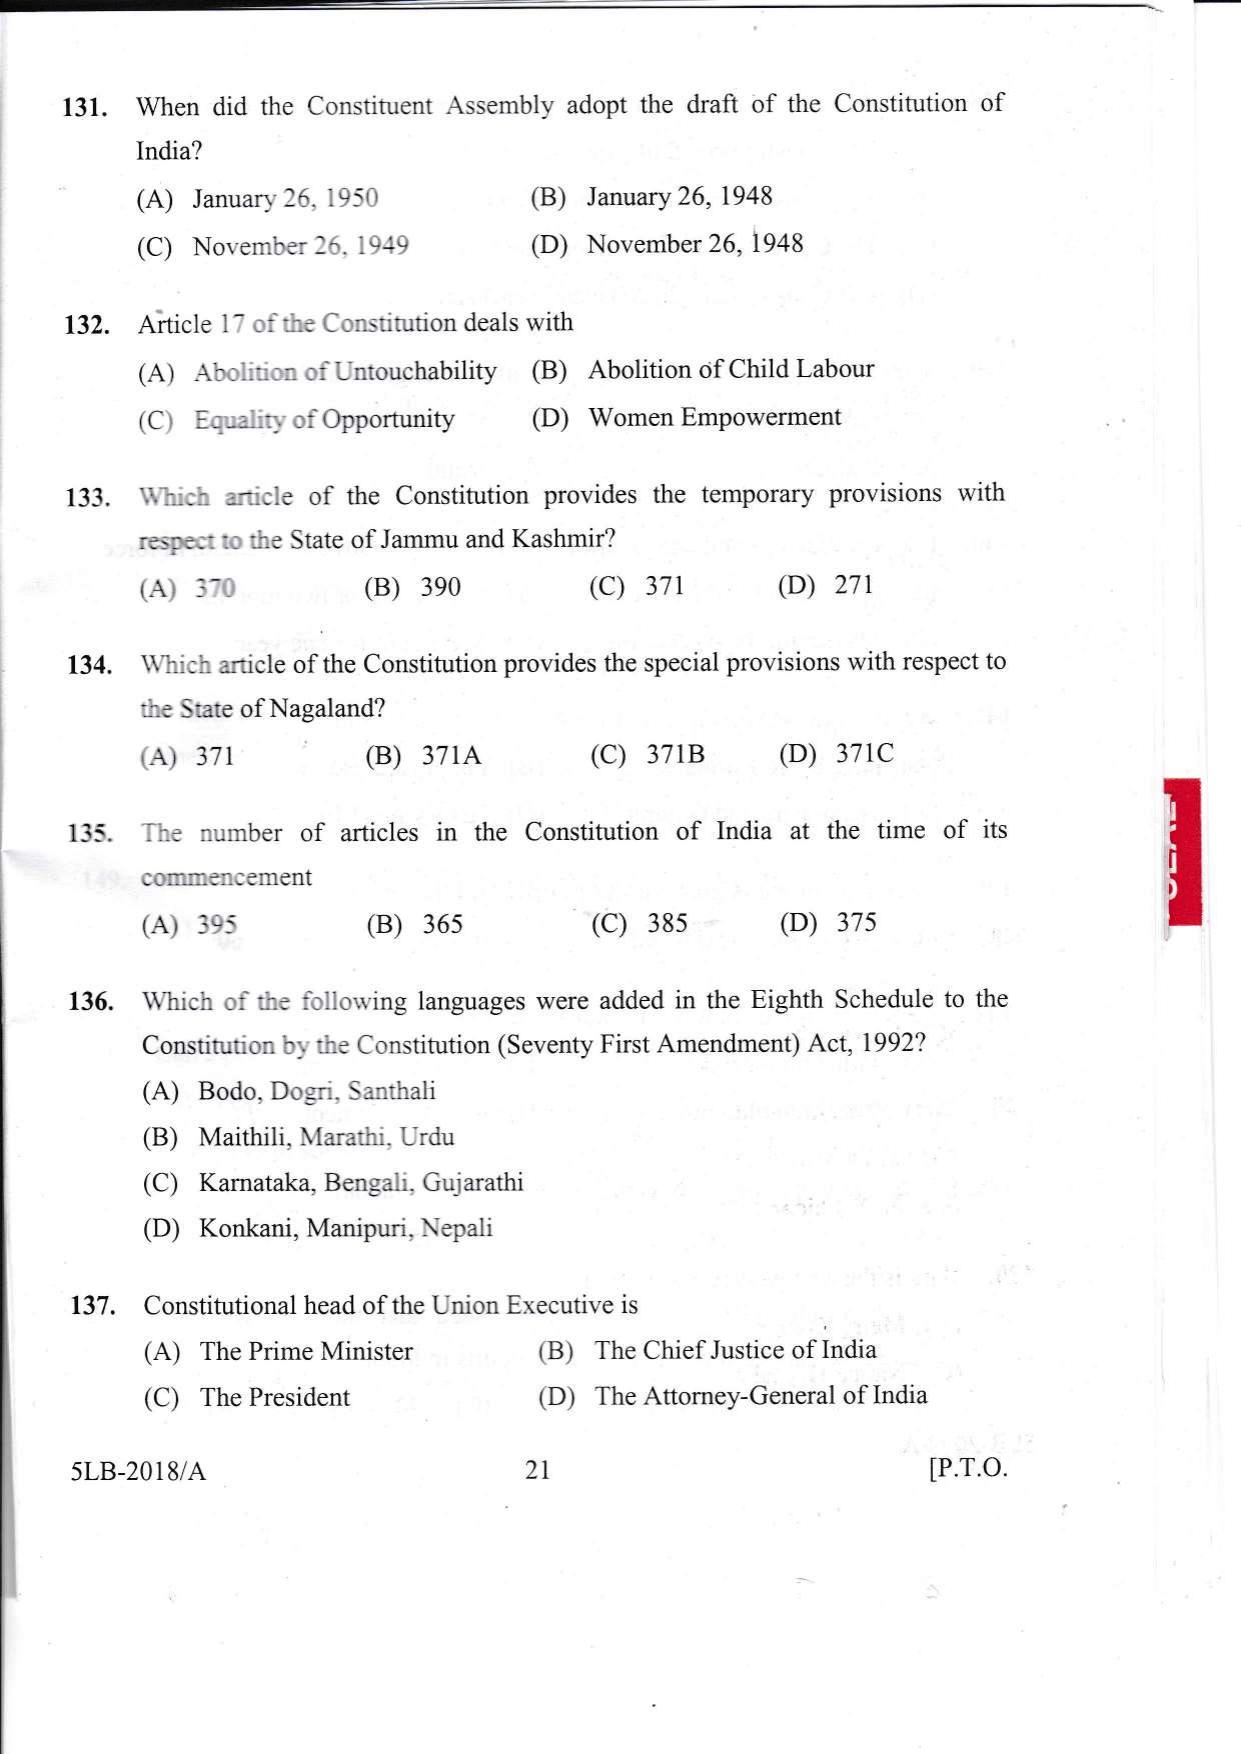 KLEE 5 Year LLB Exam 2018 Question Paper - Page 21